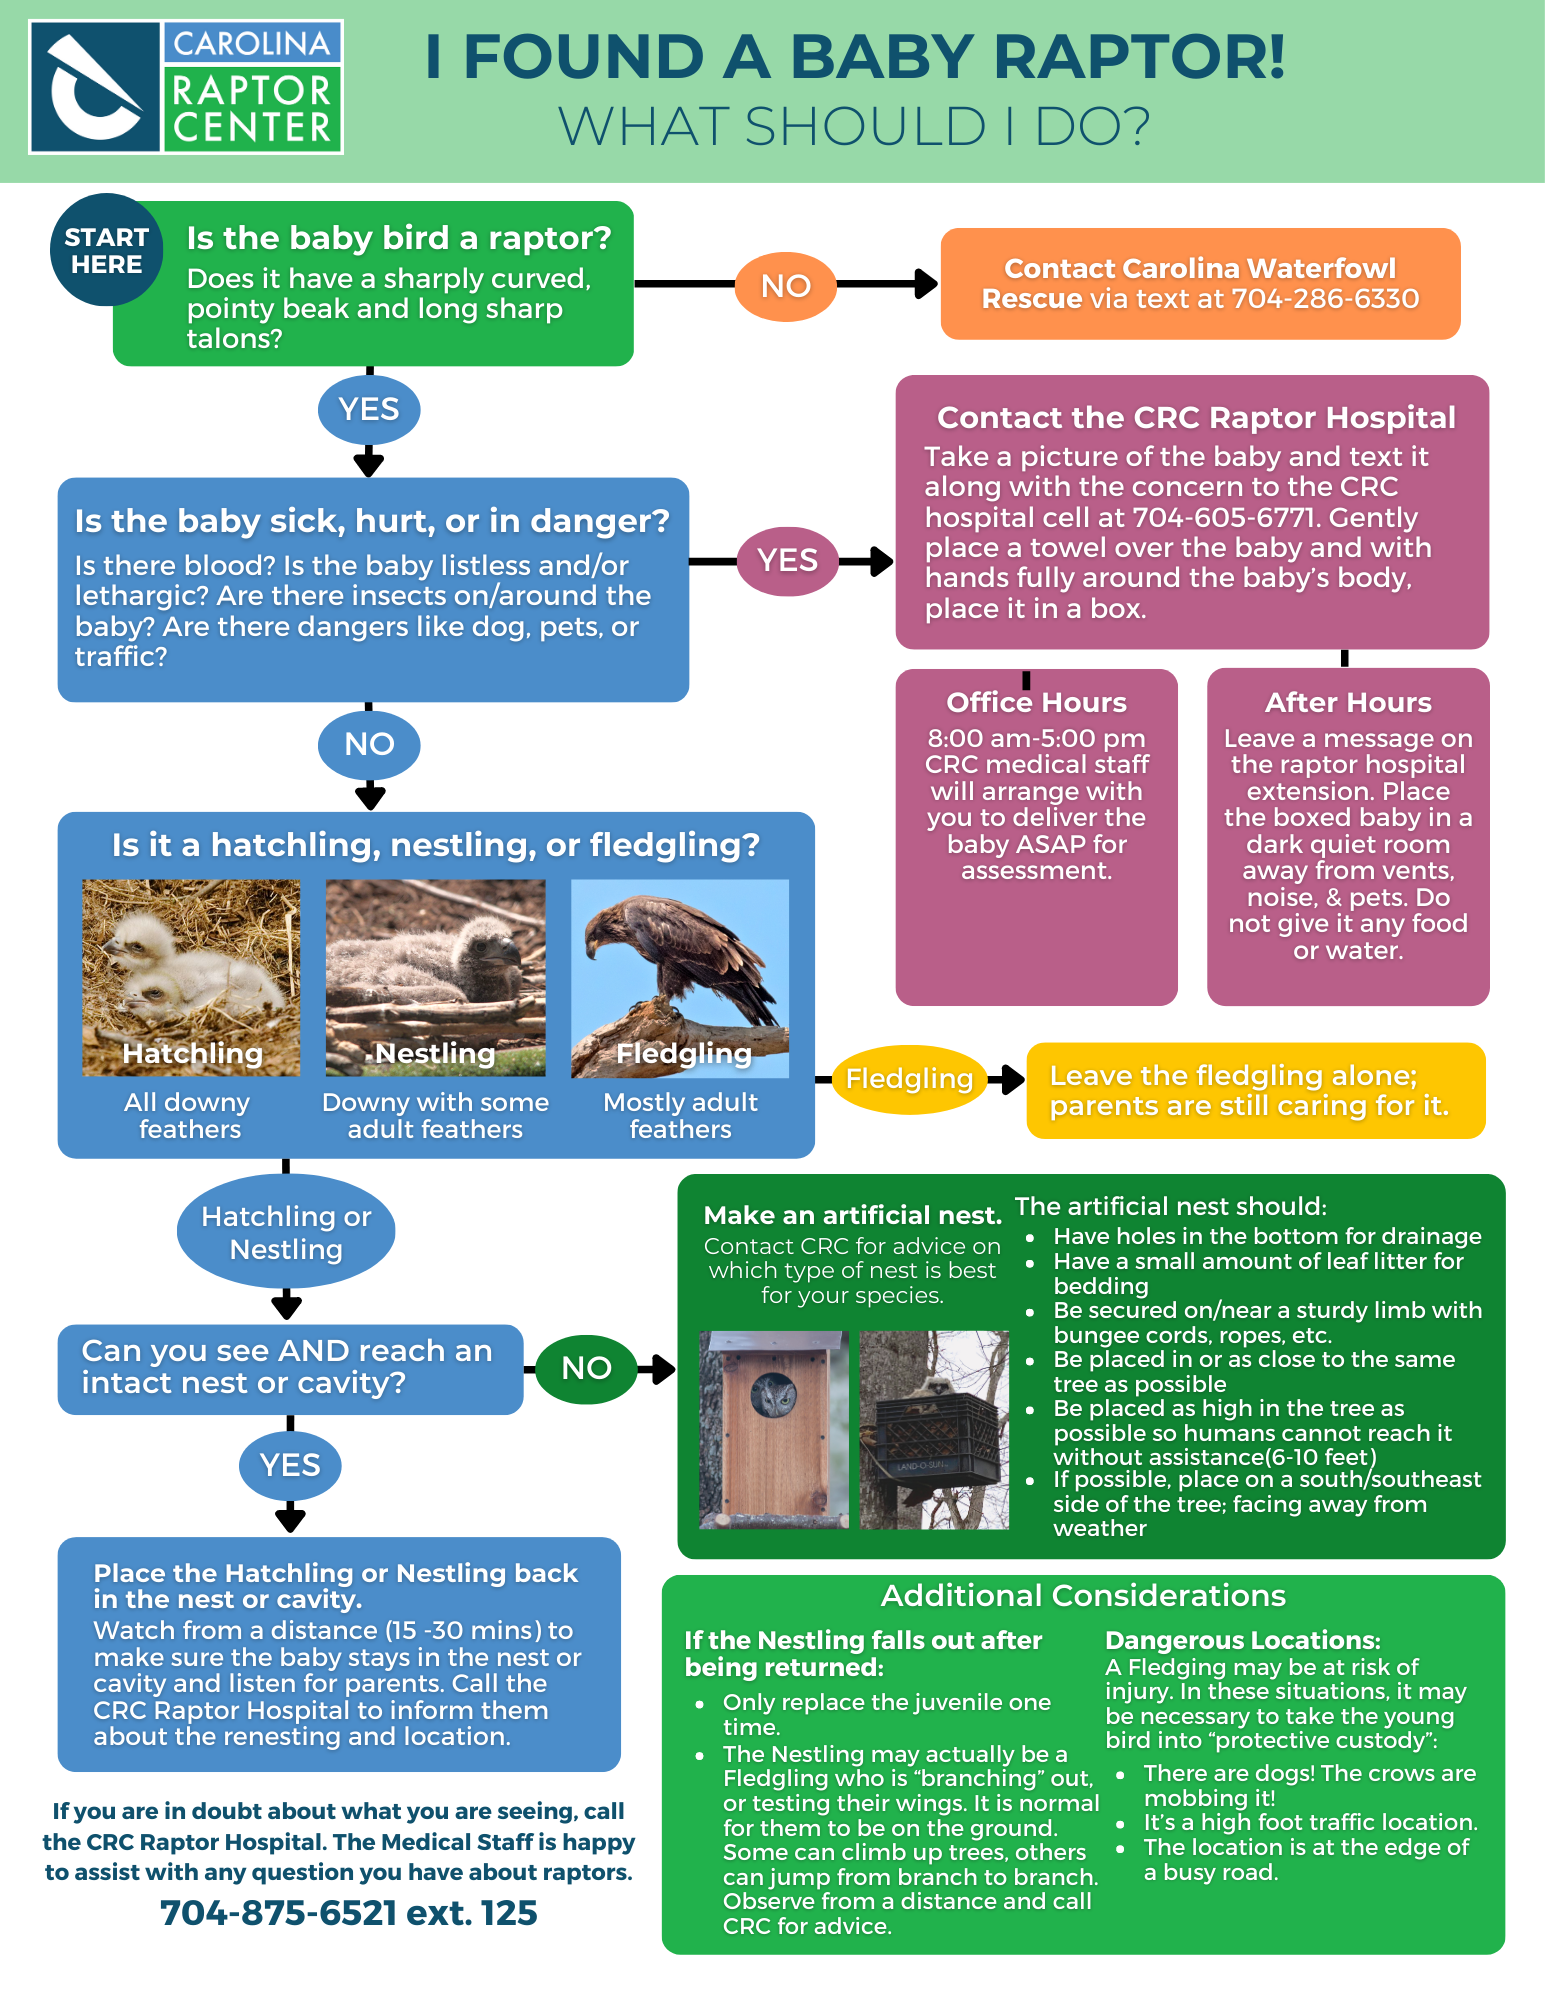 Flow chart depicting what to do if you find a baby raptor.